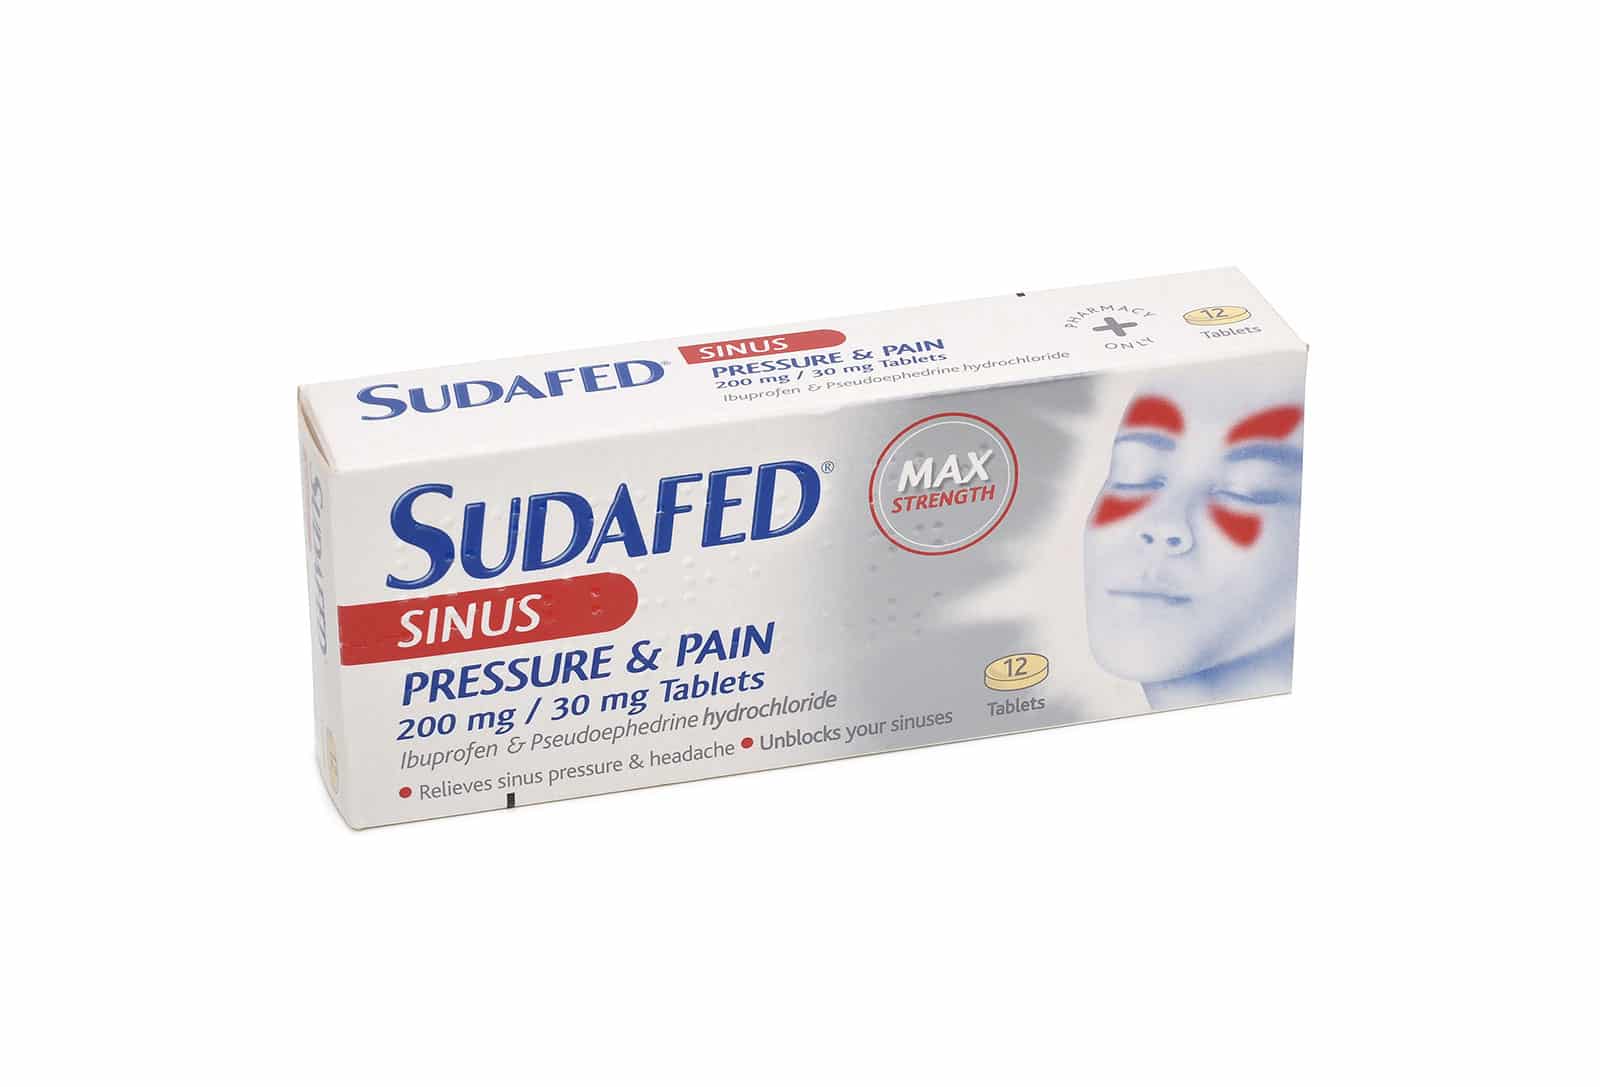 Can you drink on Sudafed?